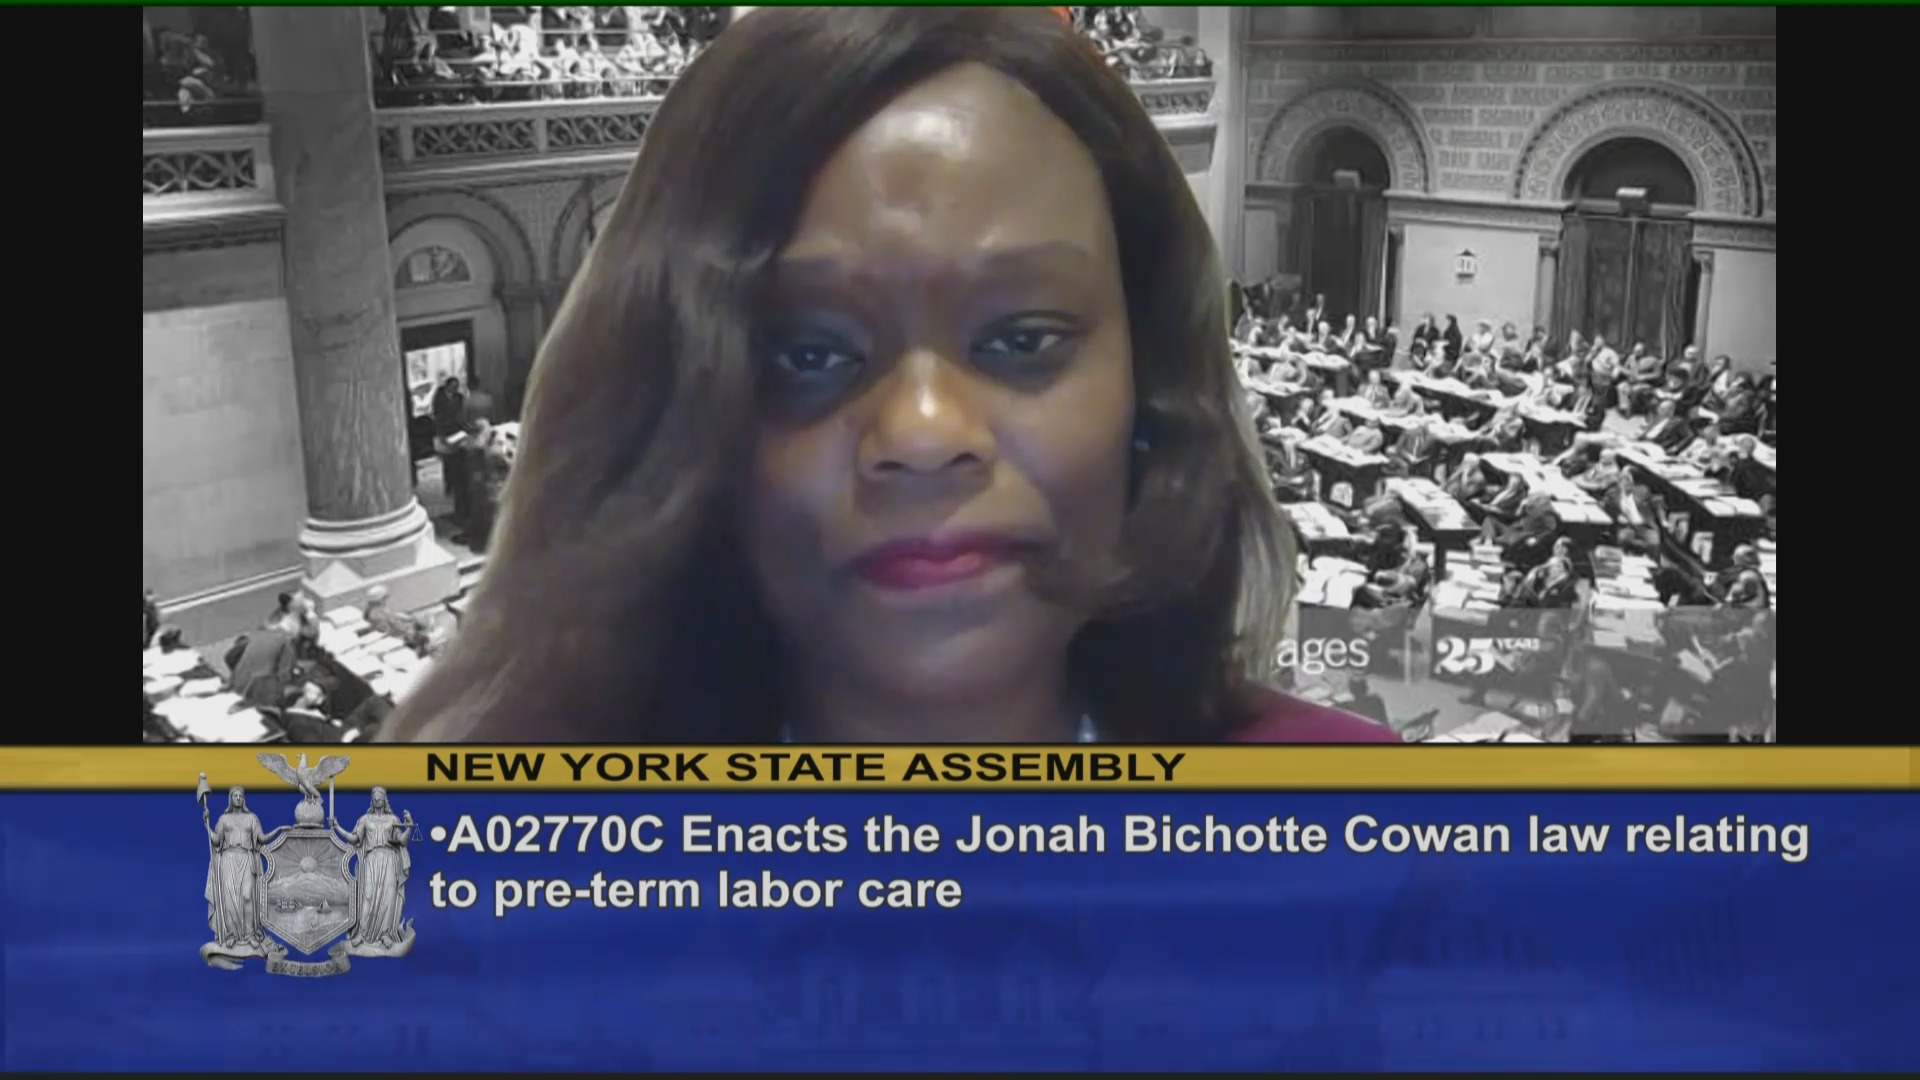 Jonah Bichotte Cowan Law Passes in the Assembly